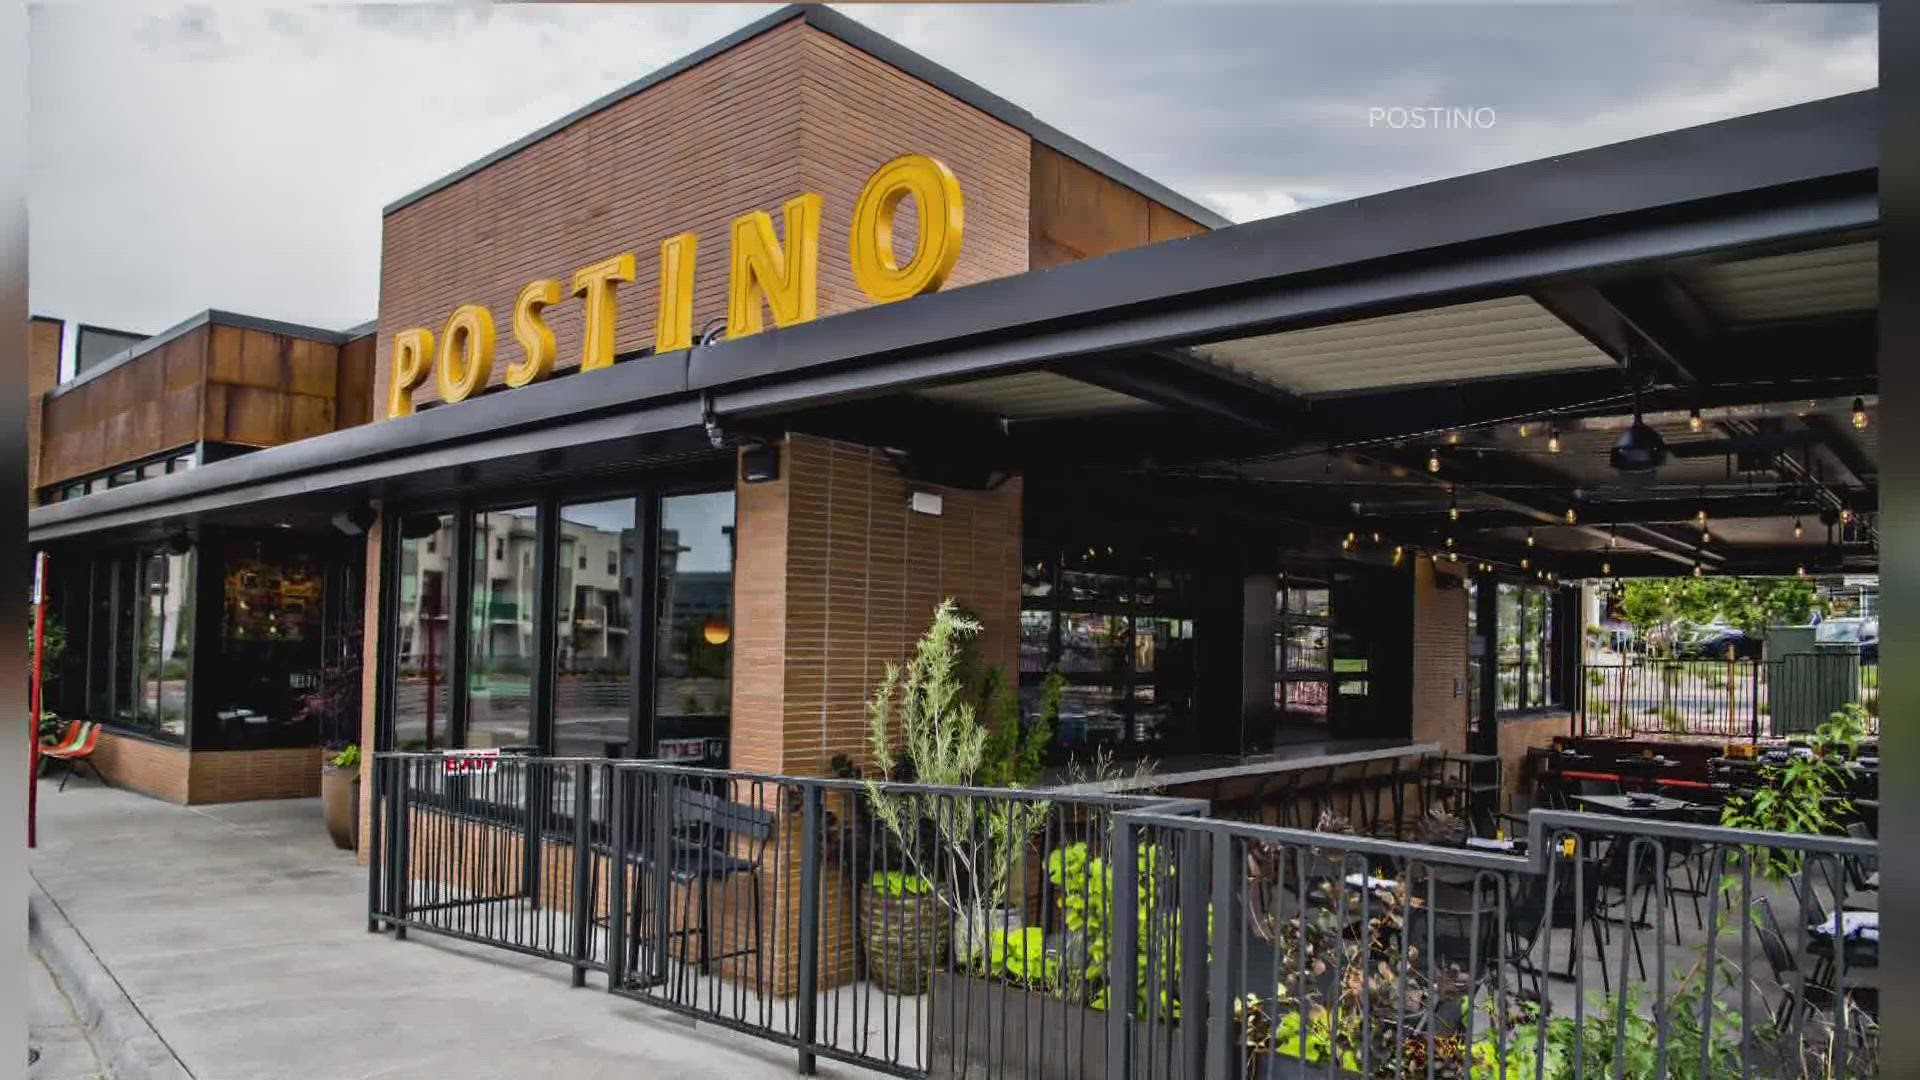 Postino WineCafé is expanding its footprint in Colorado. The restaurant opened its newest location at the Highlands Ranch Town Center.